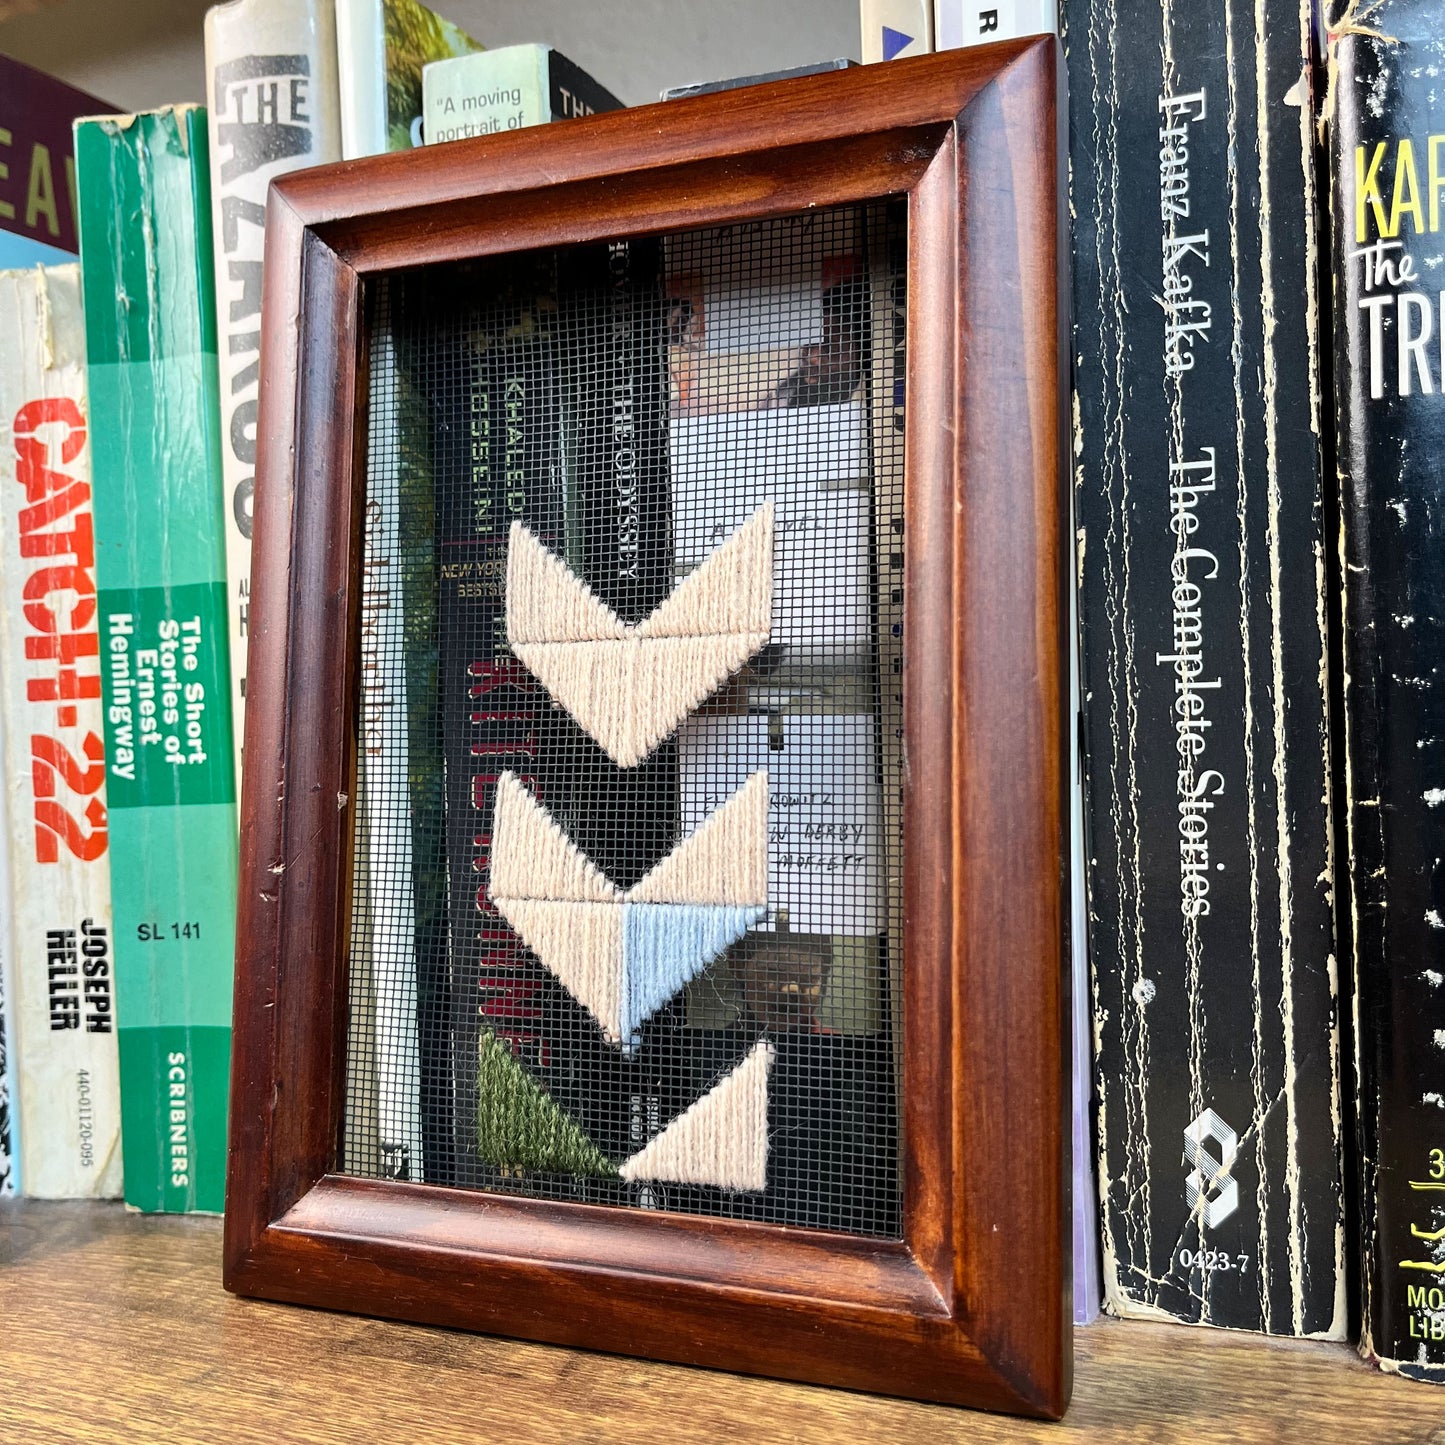 a piece of window screen hand stitched with triangles forming large chevrons centered on the screen, running off the bottom, mostly in peach with some light blue and olive green, in a wood frame, in front of a row of books